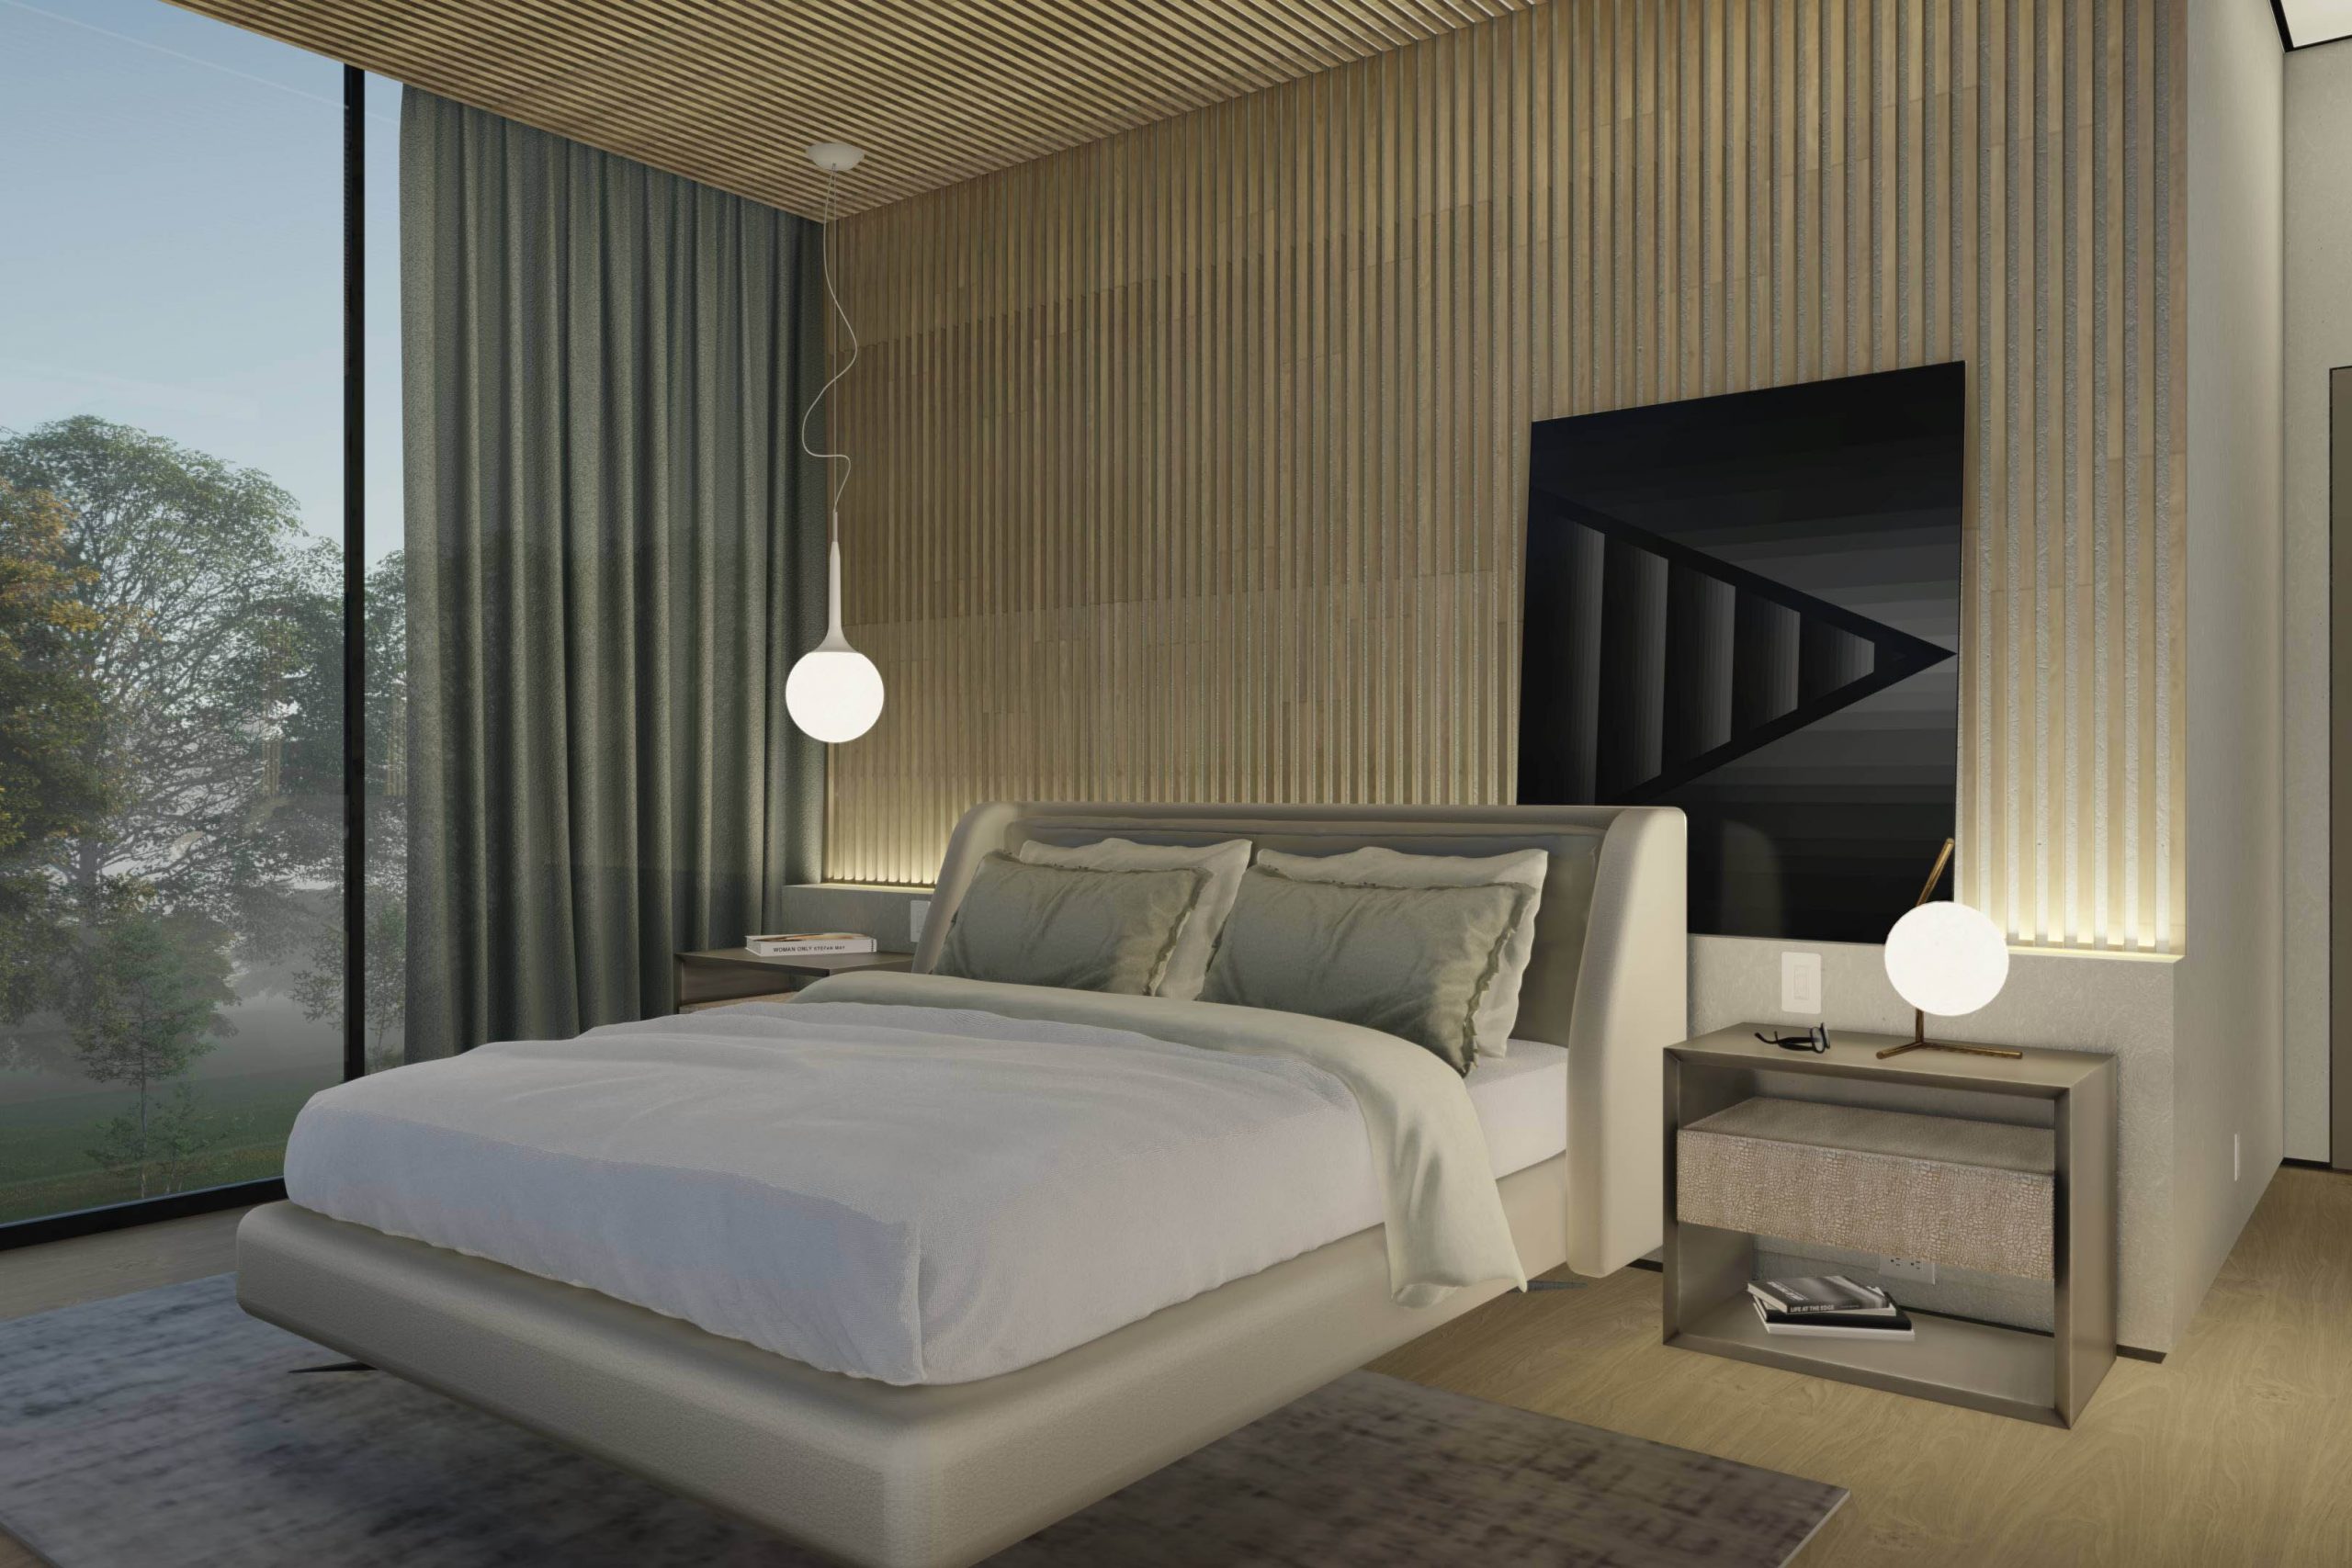 Minimalist bedroom design with slatted panel headboard and ceiling in oak wood, asymmetrical pendants, light colors and dark painting positioned behind bed